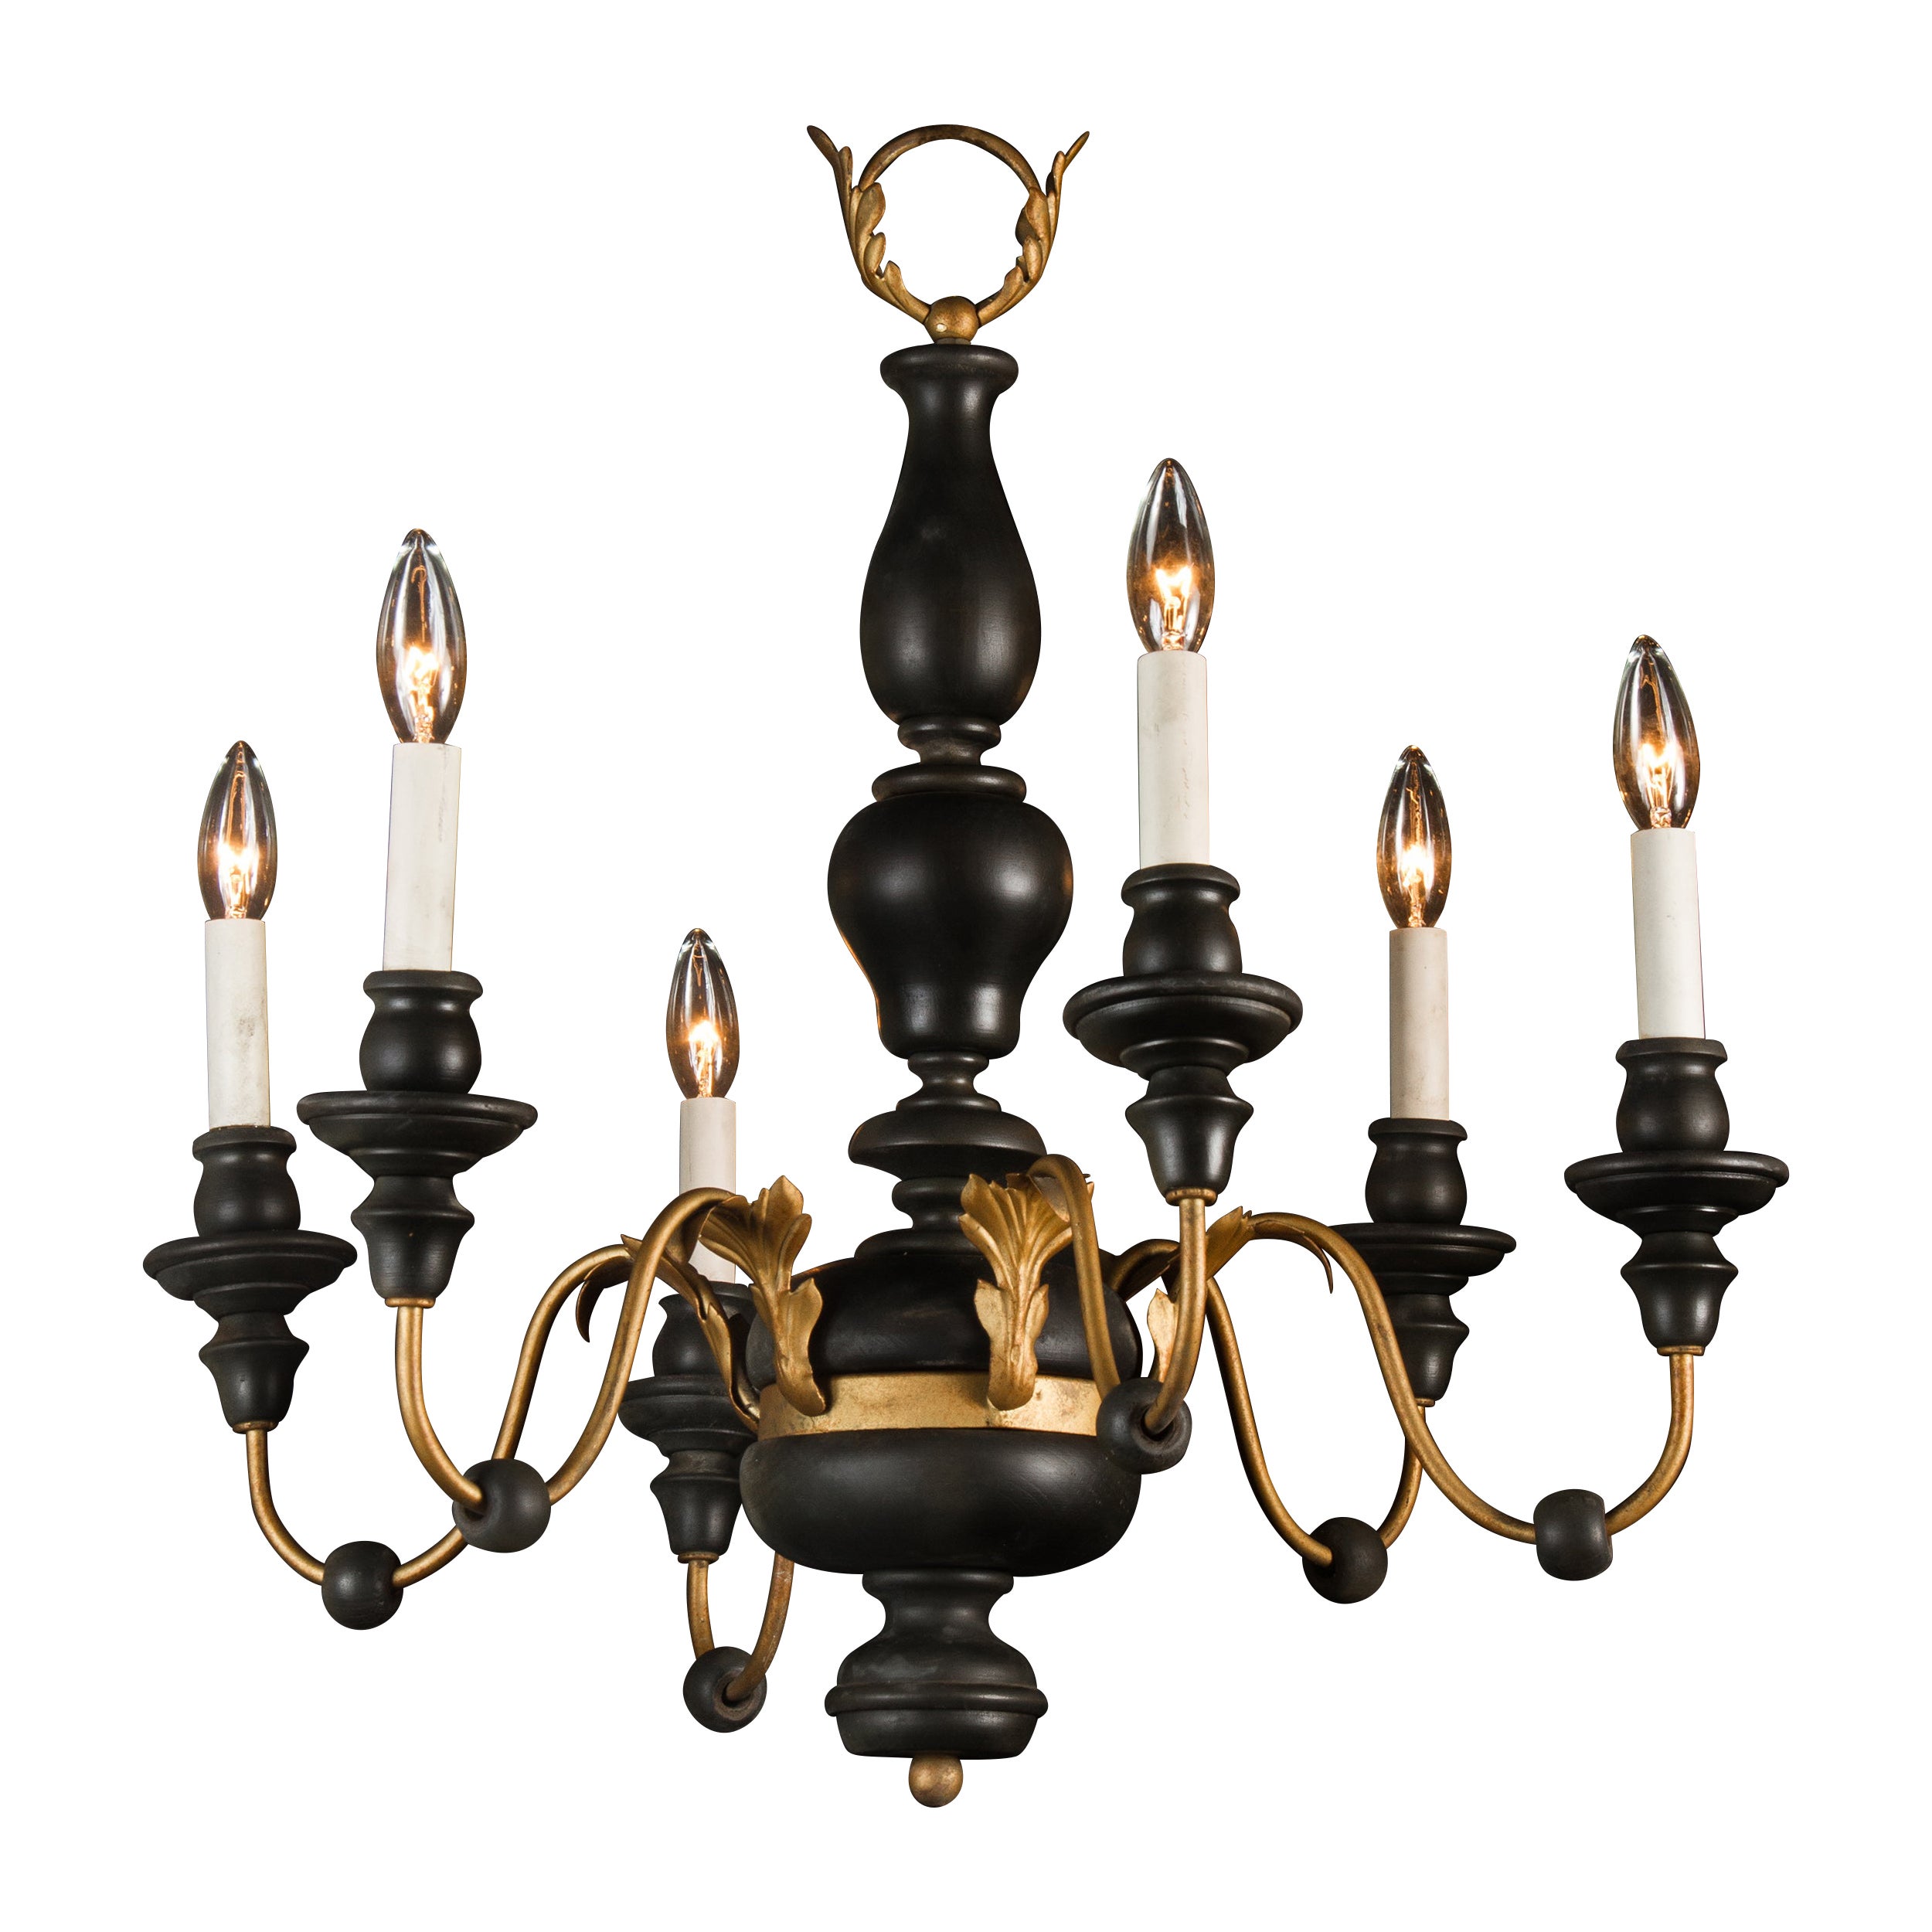 Black and Gold Wood Chandelier with Iron and Tole, Italian Mid-20th Century For Sale